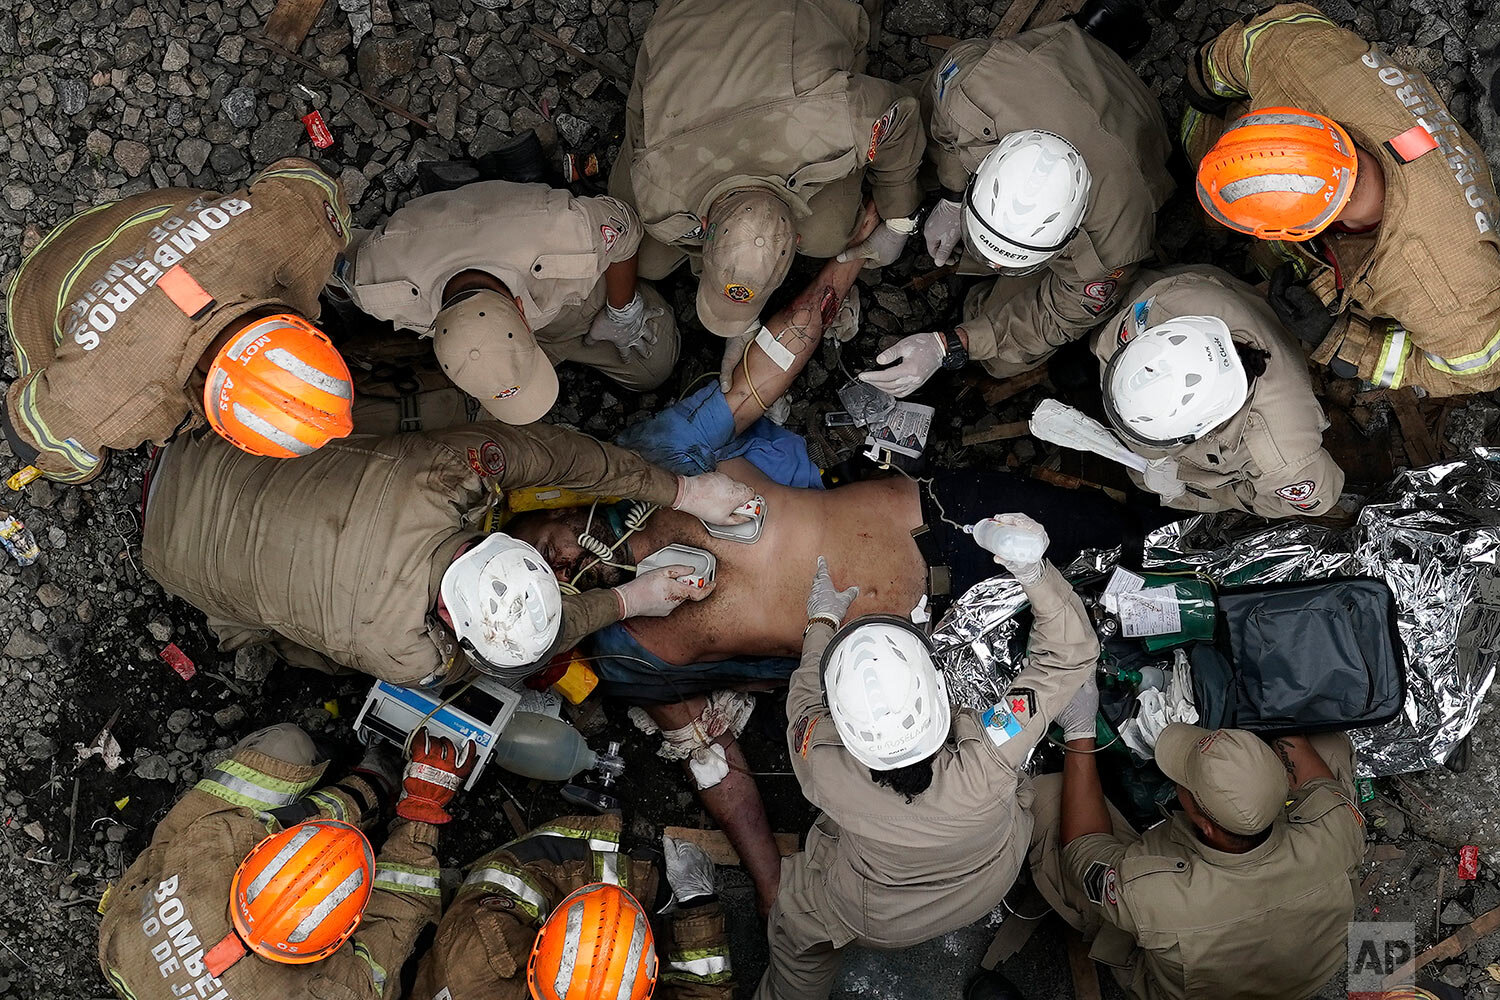  Firefighters work to resuscitate the driver of a commuter train who was injured in a collision with another train in Sao Cristovao station in Rio de Janeiro, Brazil, on Feb. 27, 2019. (AP Photo/Leo Correa) 